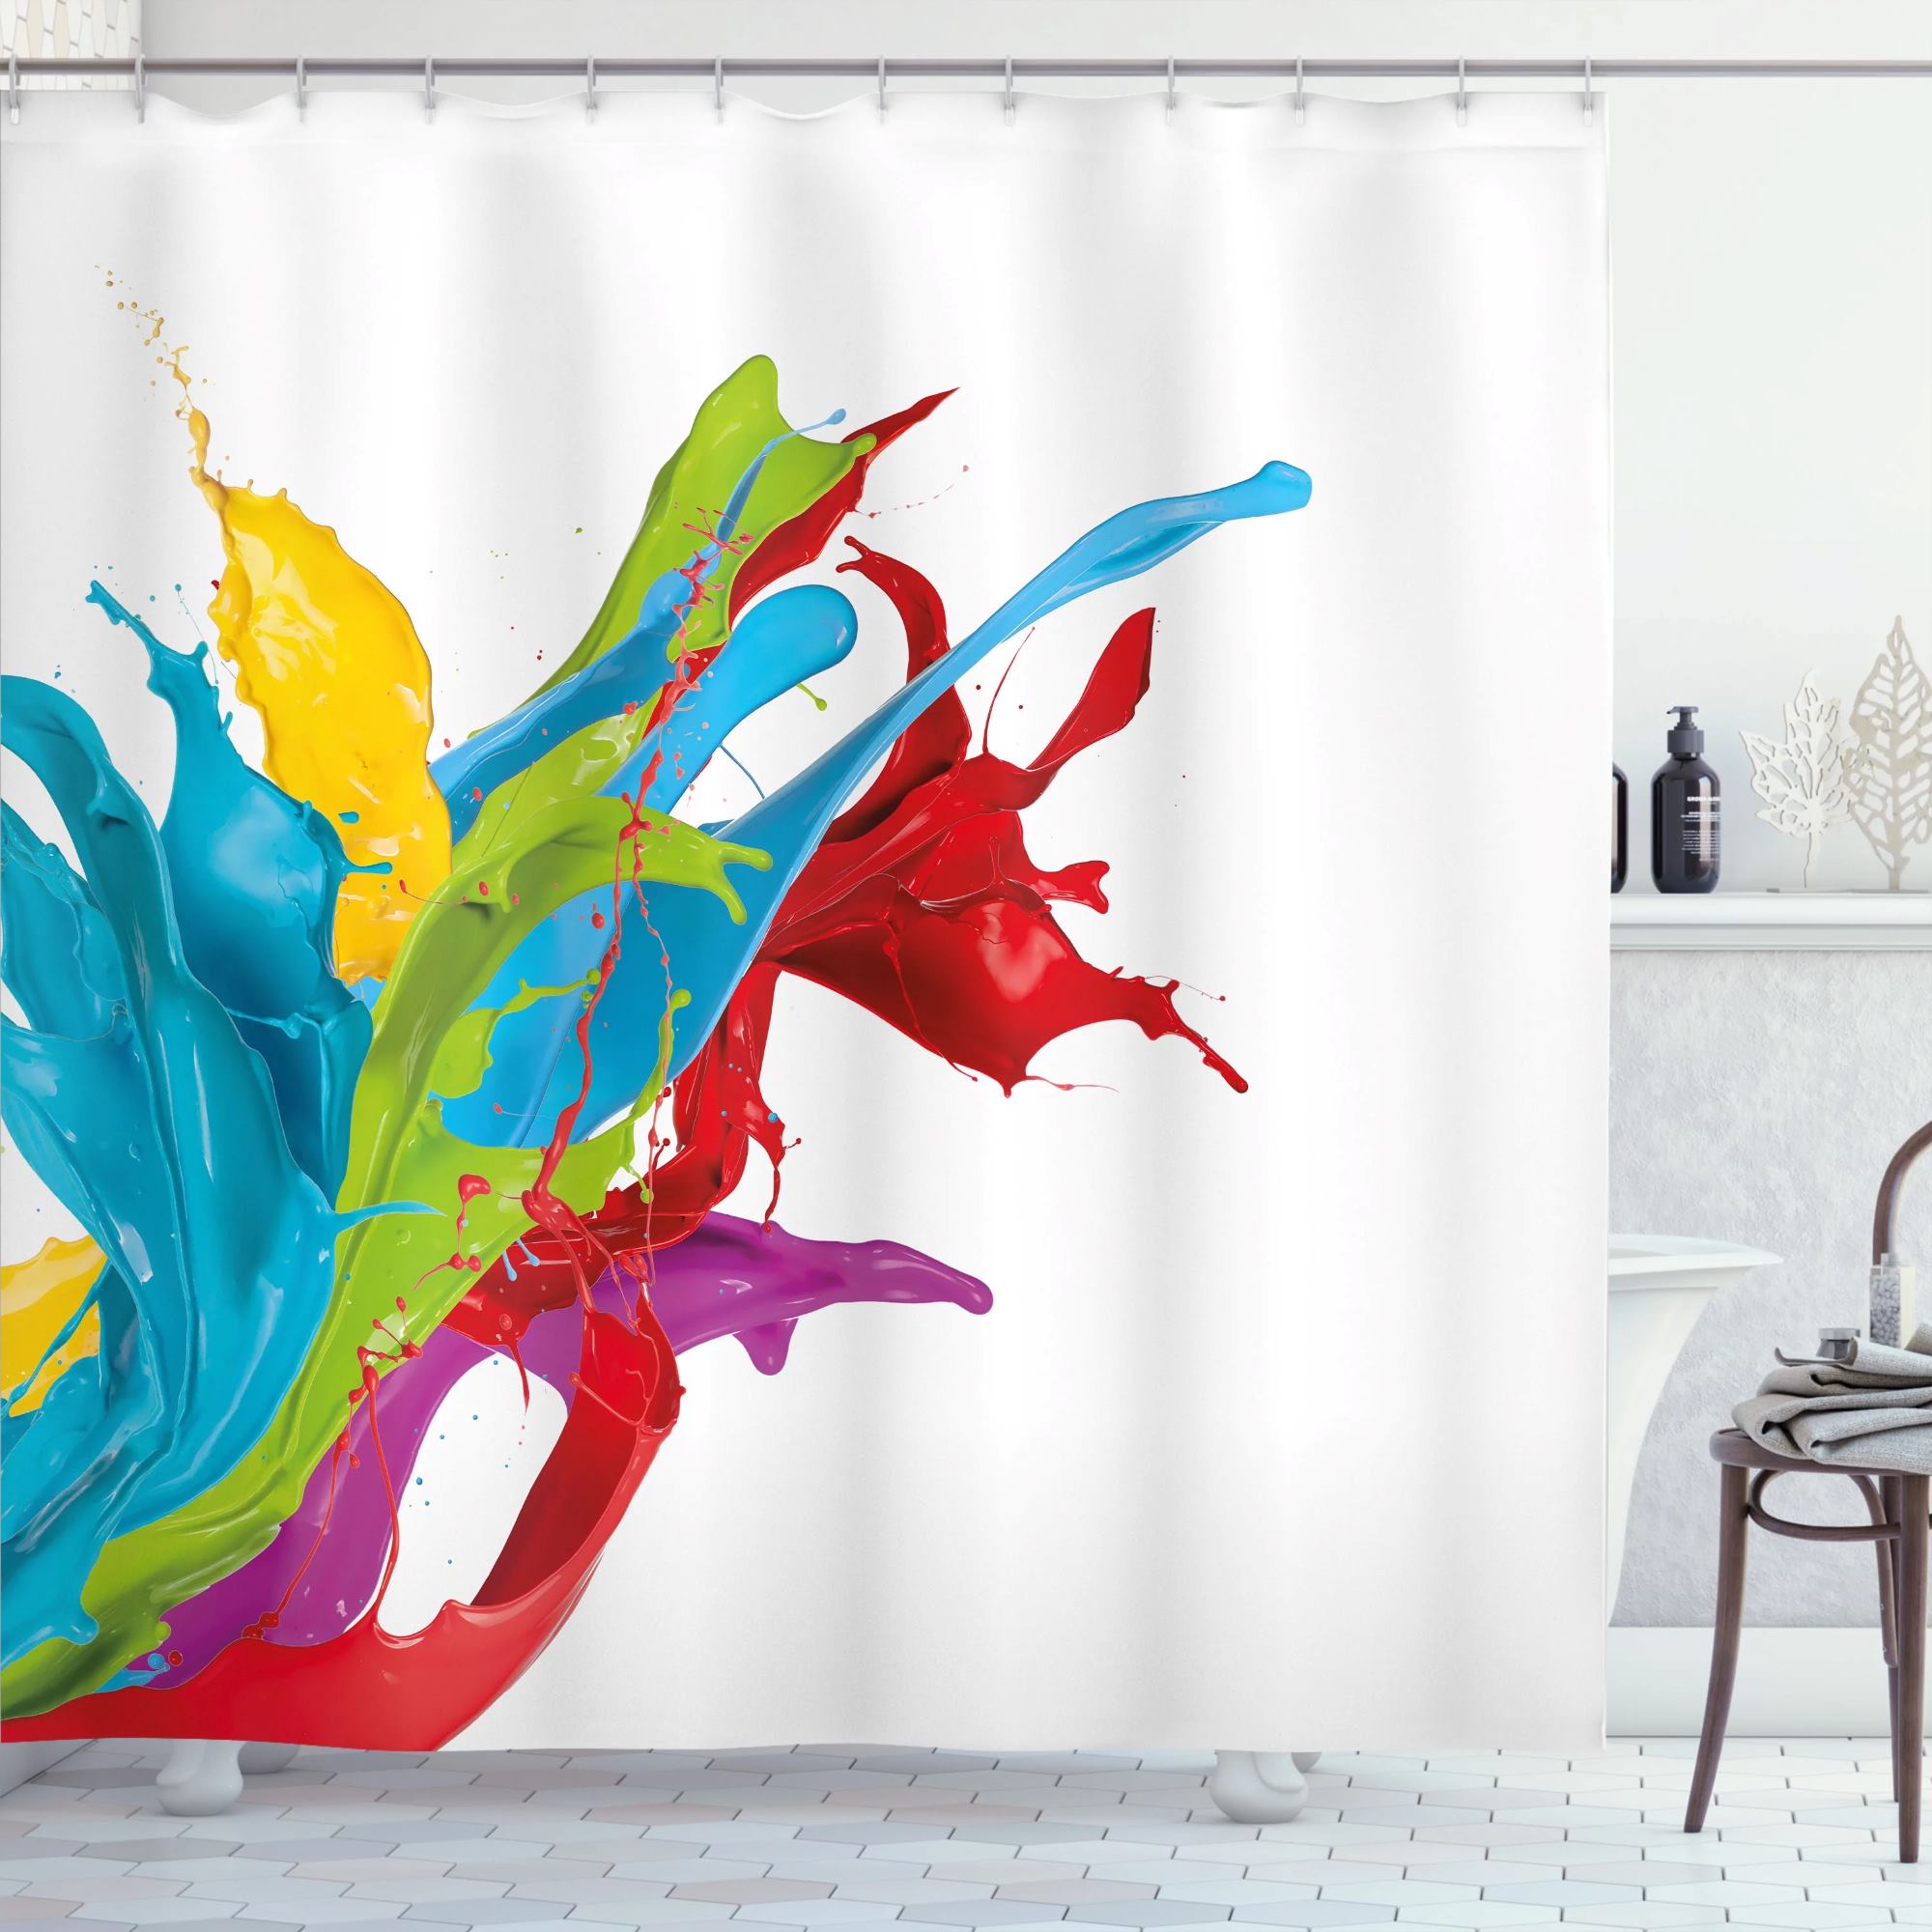 How To Paint A Shower Curtain